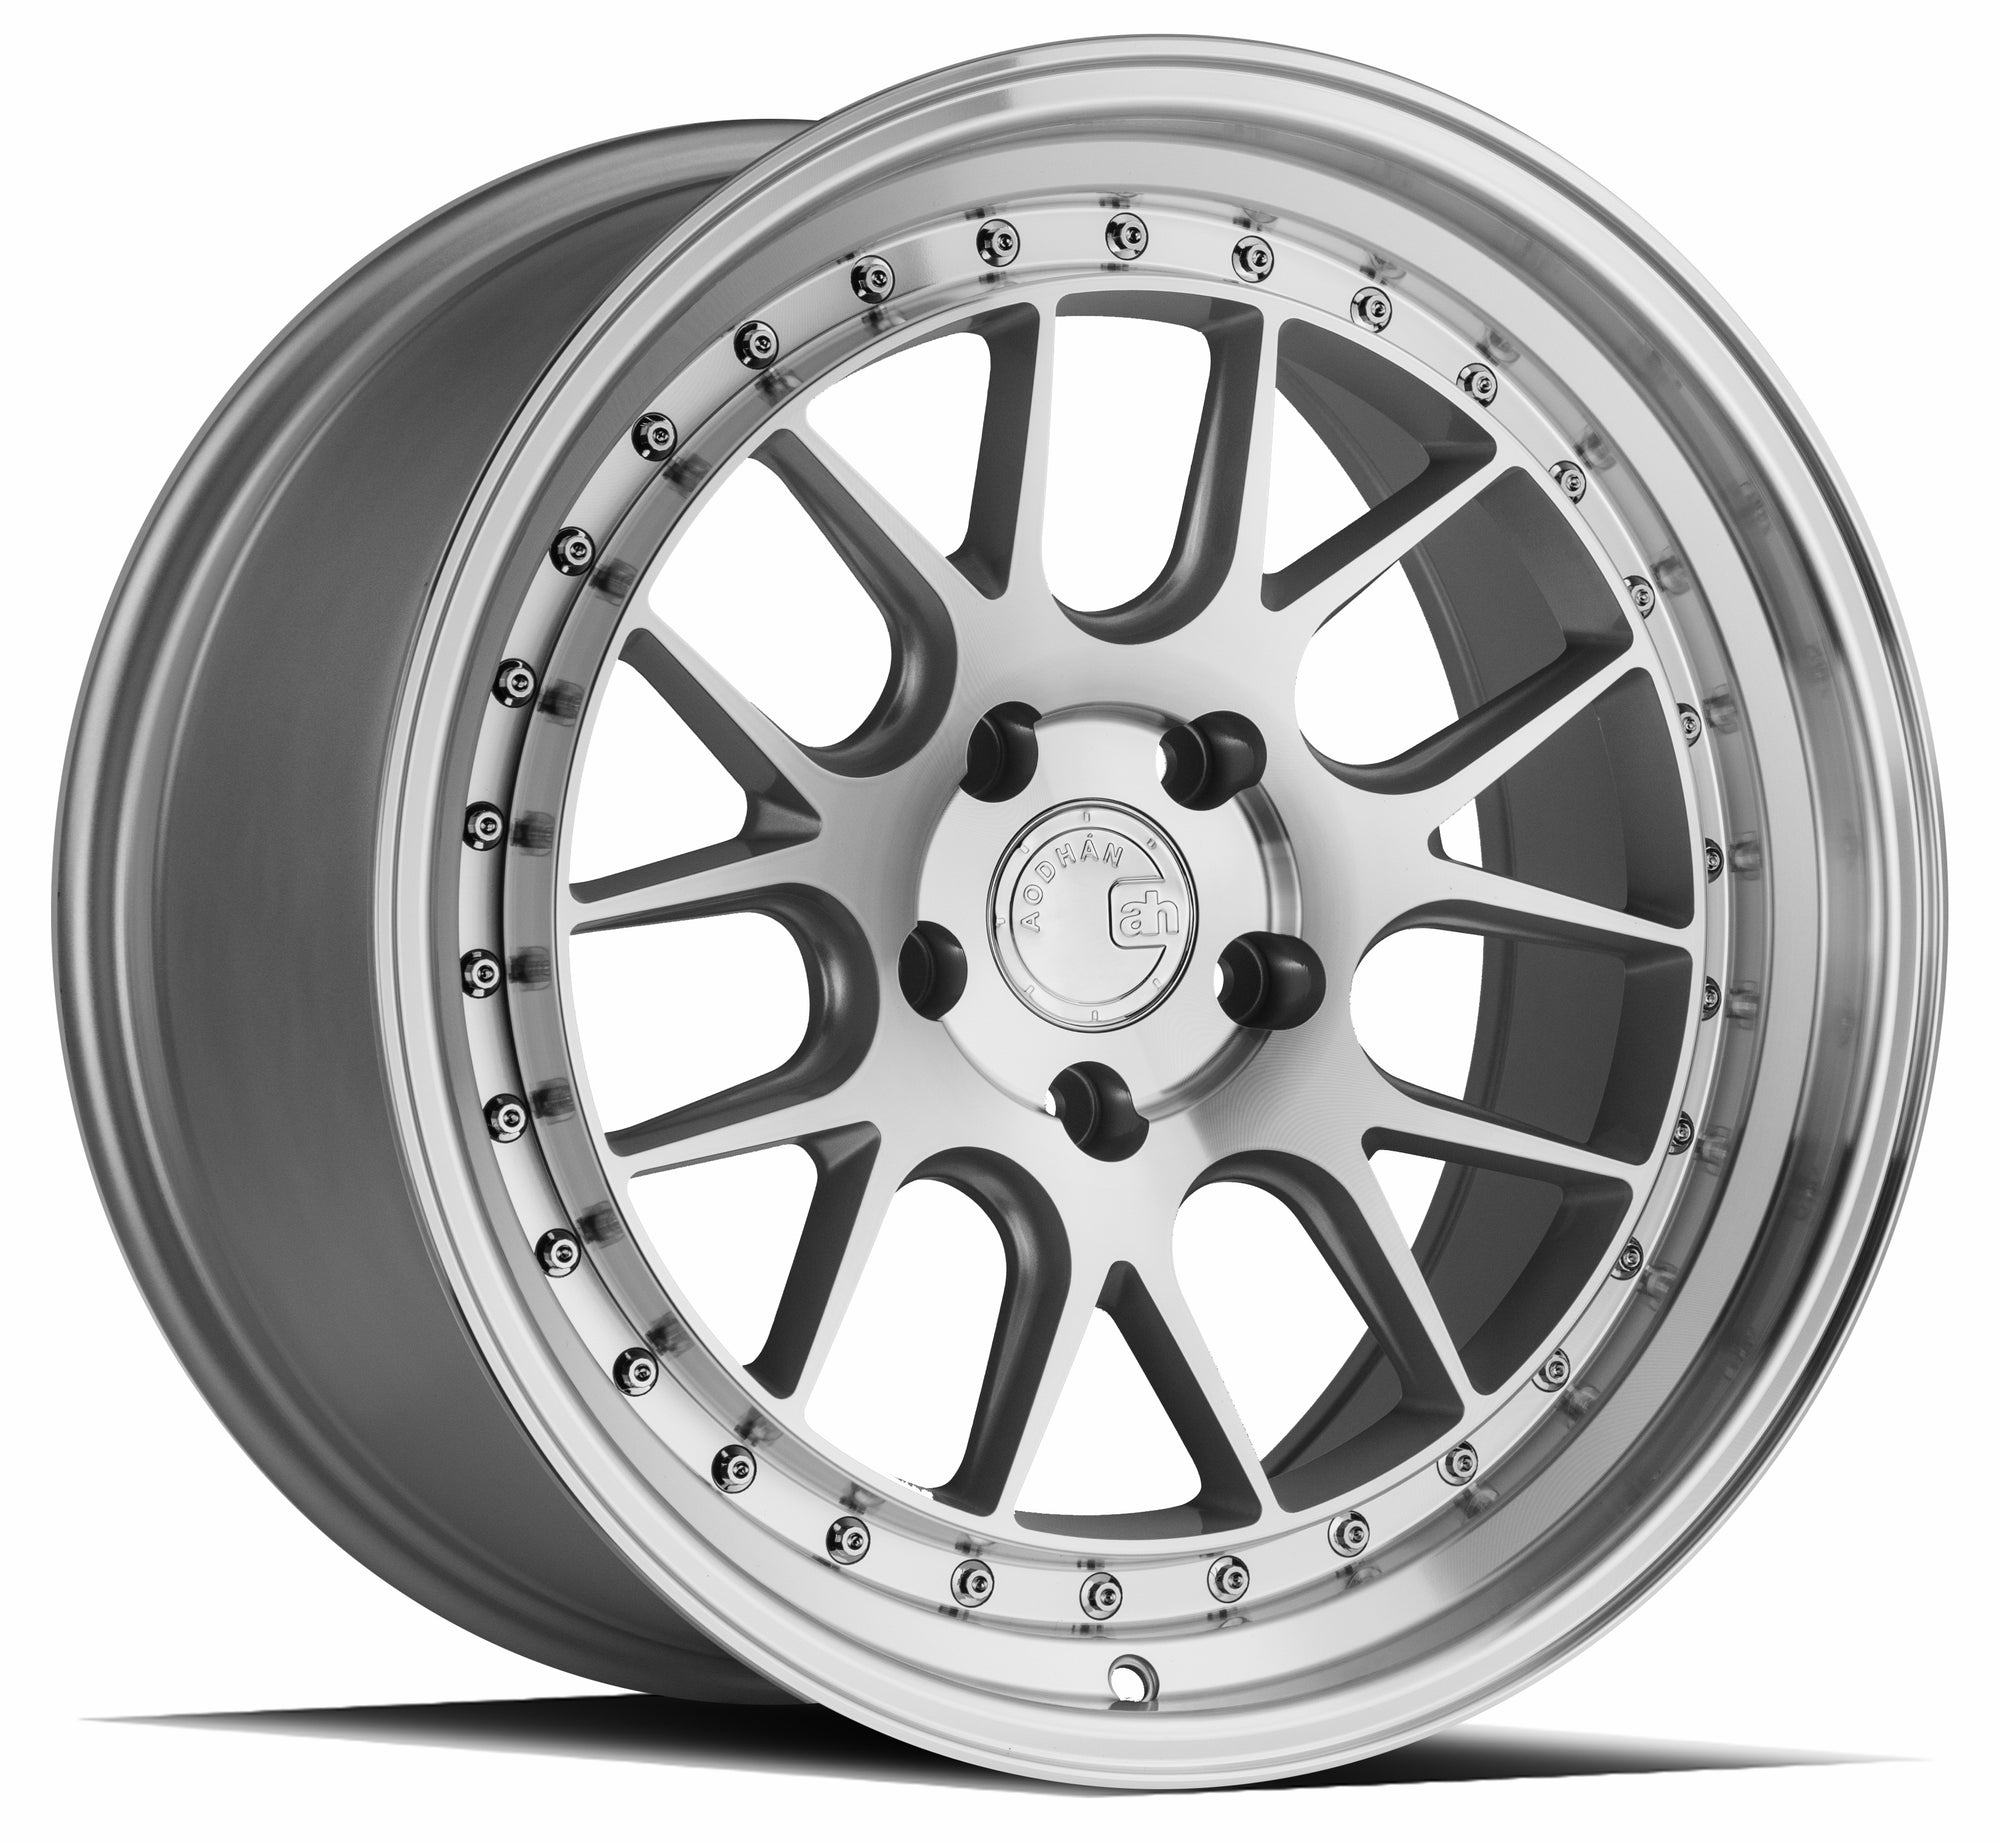 Aodhan DS06 18x9.5 5x114.3 +15 Silver w/Machined Face